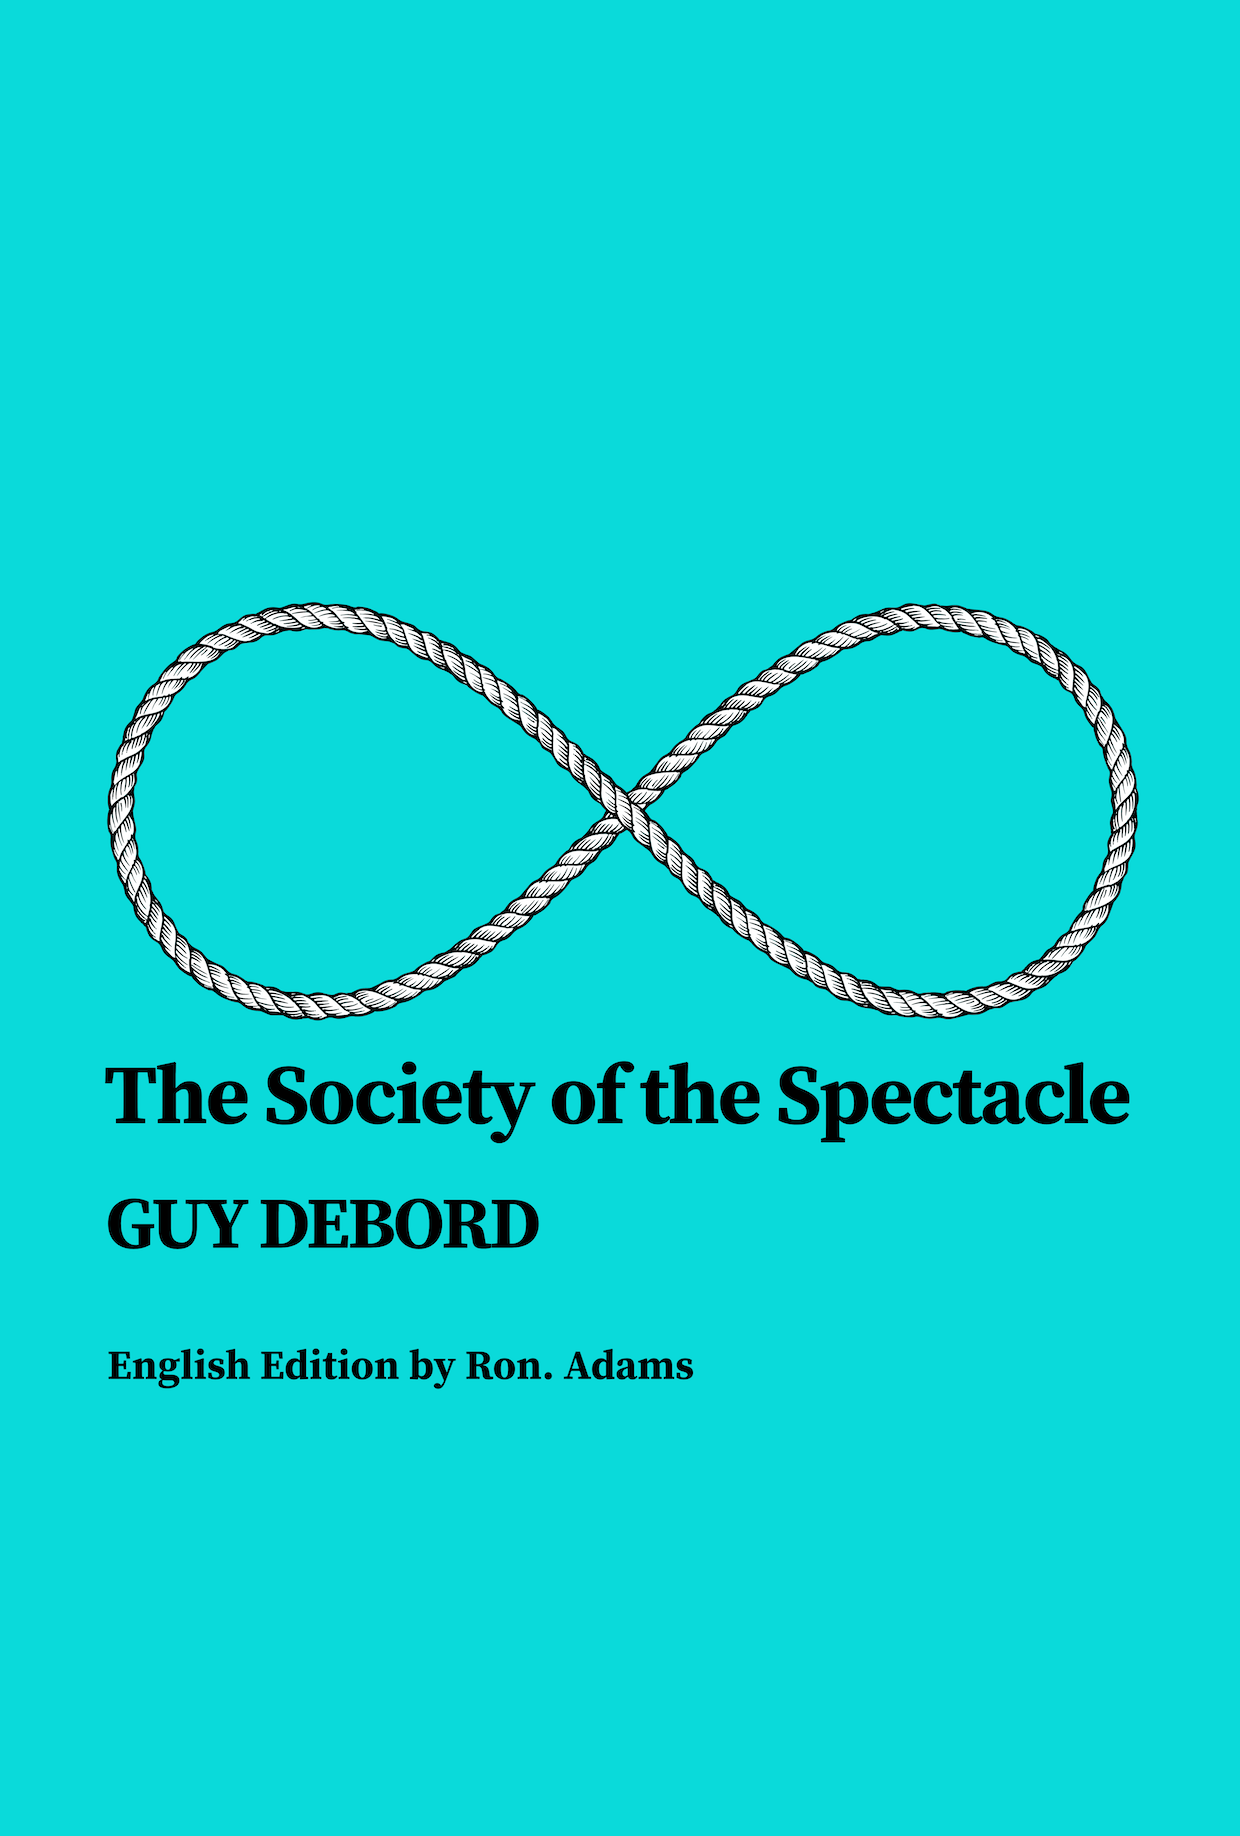 The Society of the Spectacle, cover design